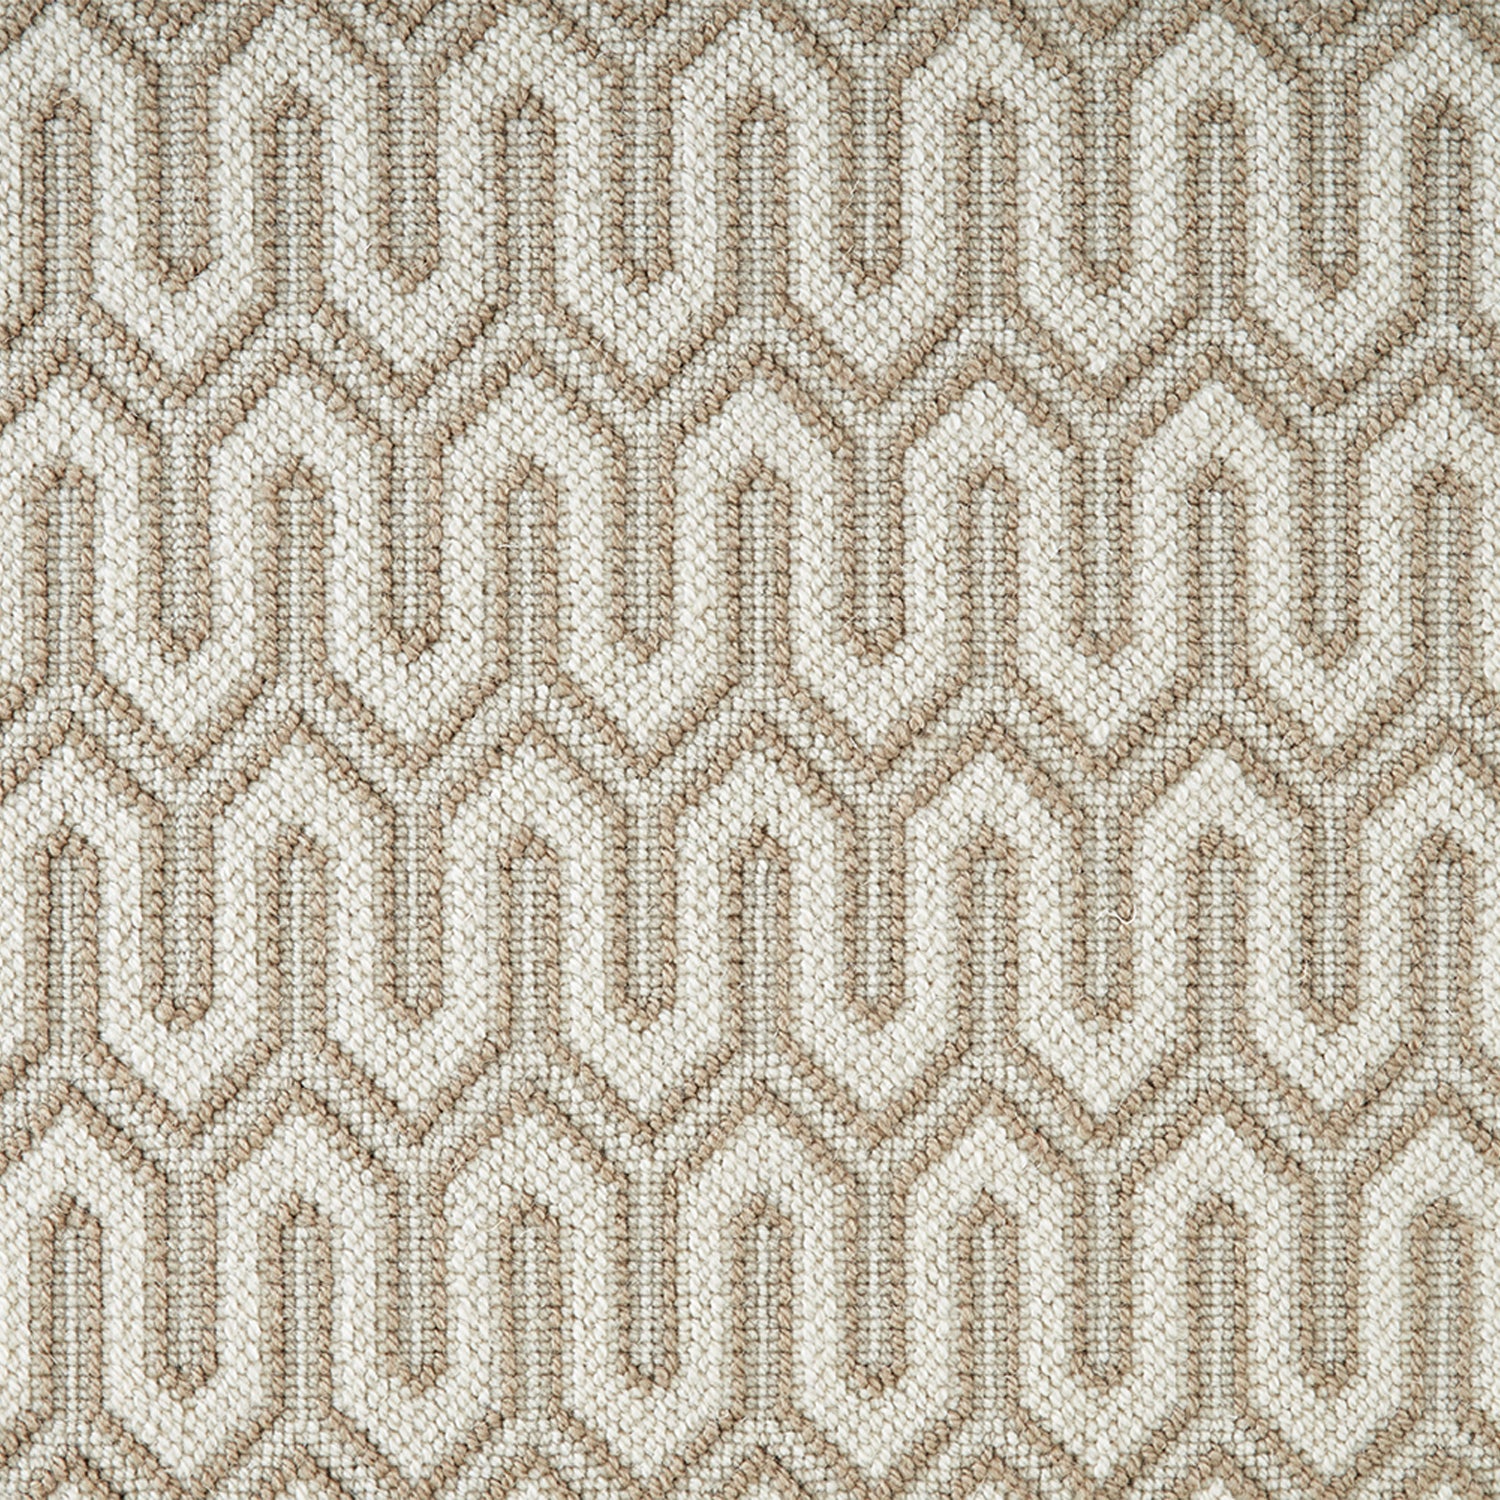 Wool-blend broadloom carpet swatch in a chunky geometric linear weave in gold, tan and cream.